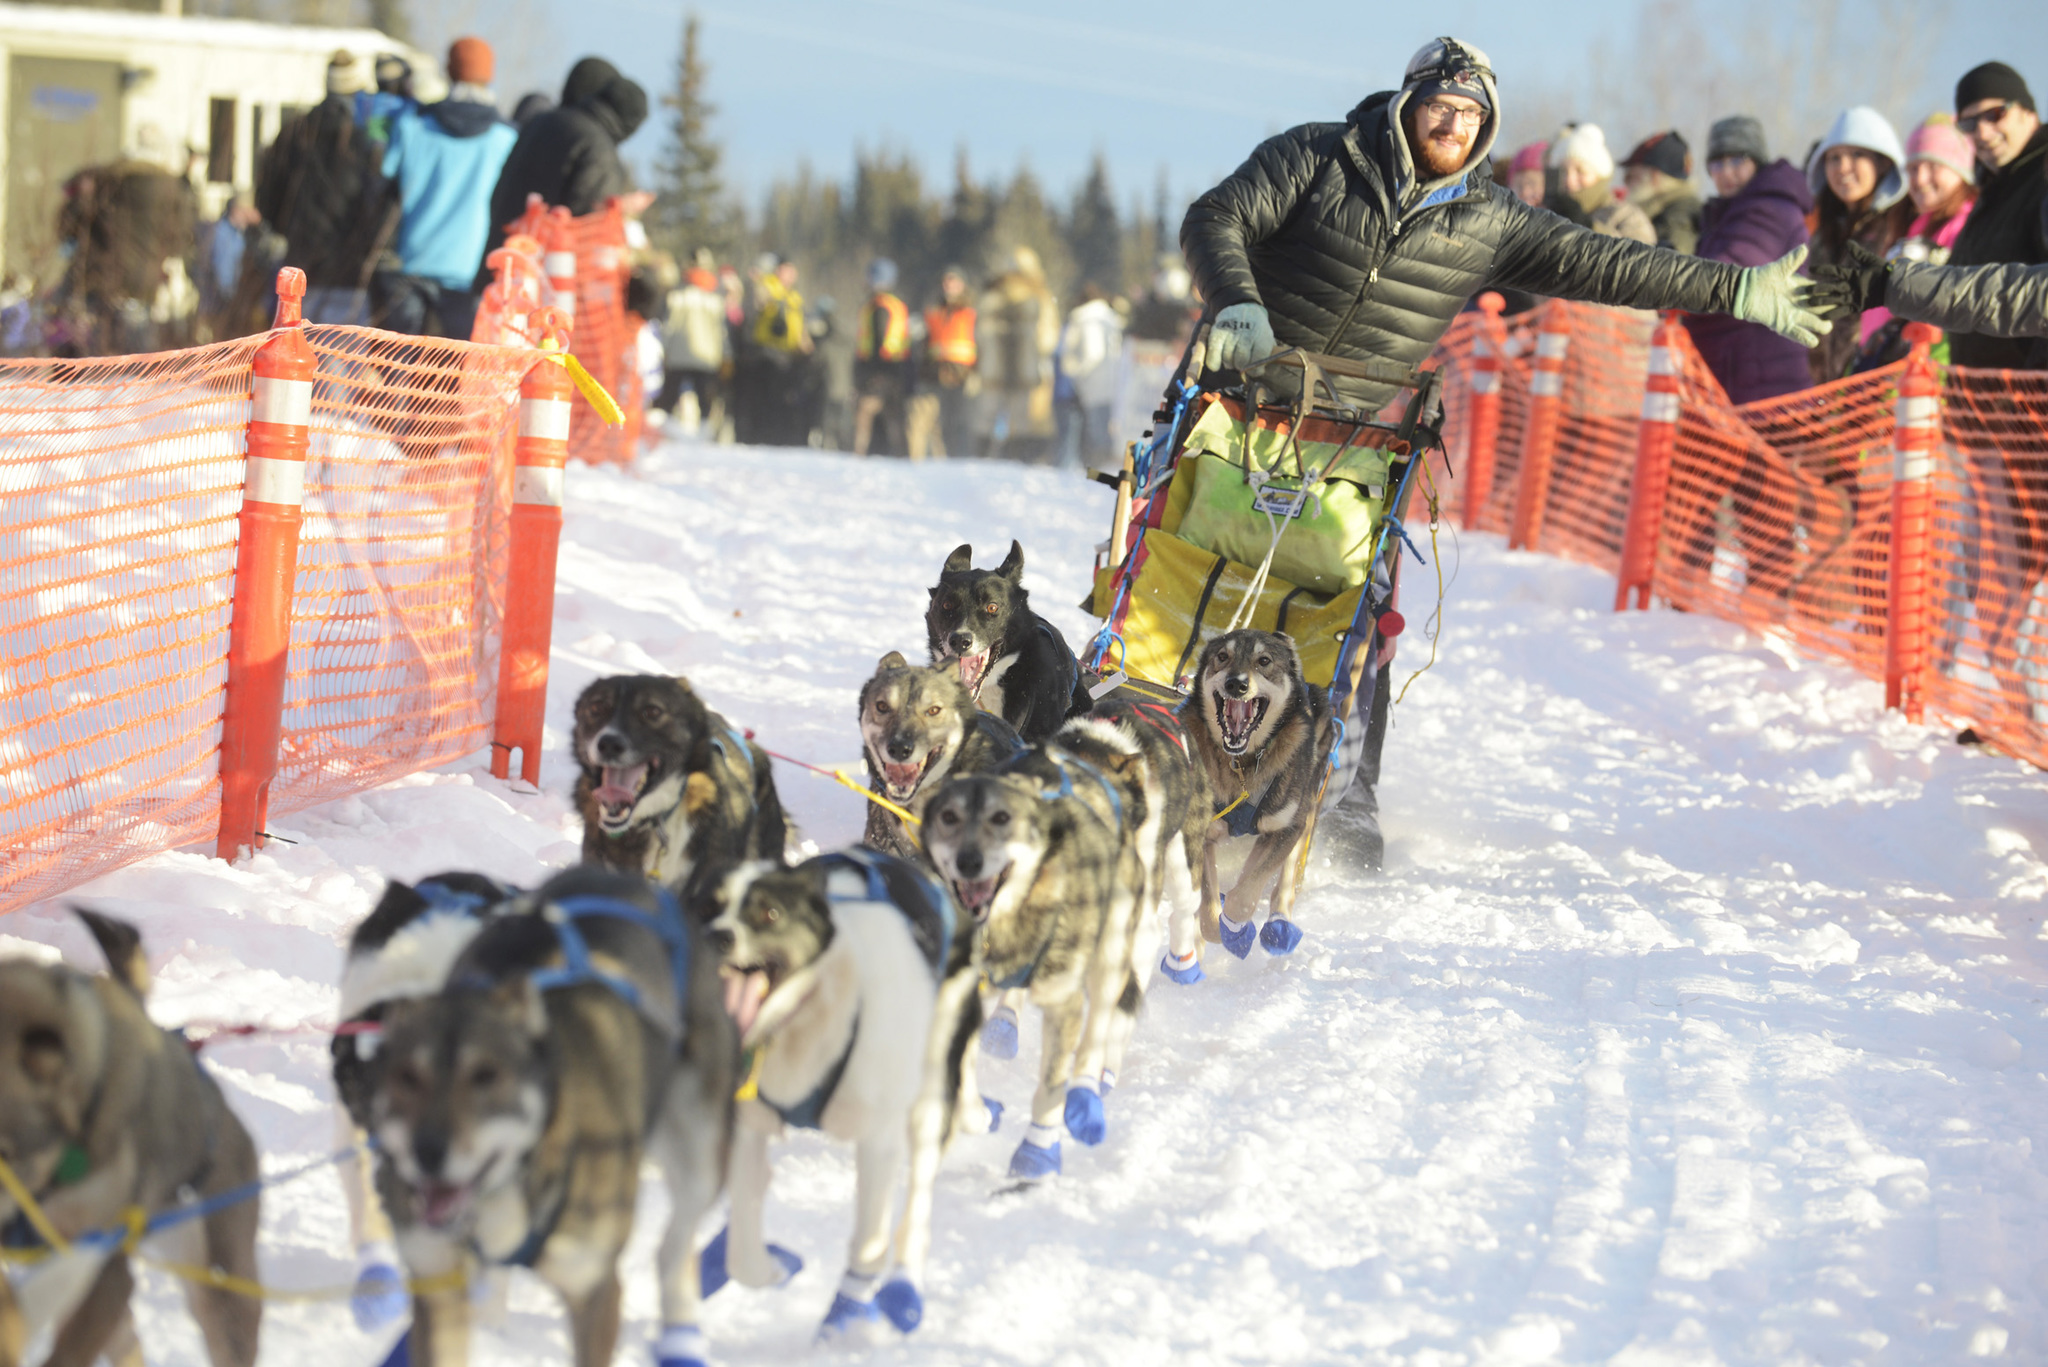 Musher Wade Marrs reached out for a high five from a spectator as he and his team take off from the starting line of the Tustumena 200 Sled Dog Race on Saturday, Jan. 28, 2017 in Kasilof, Alaska. Marrs and 22 other teams will travel through the Caribou Hills down to Homer and back in the 200-mile race. (Megan Pacer/Peninsula Clarion)